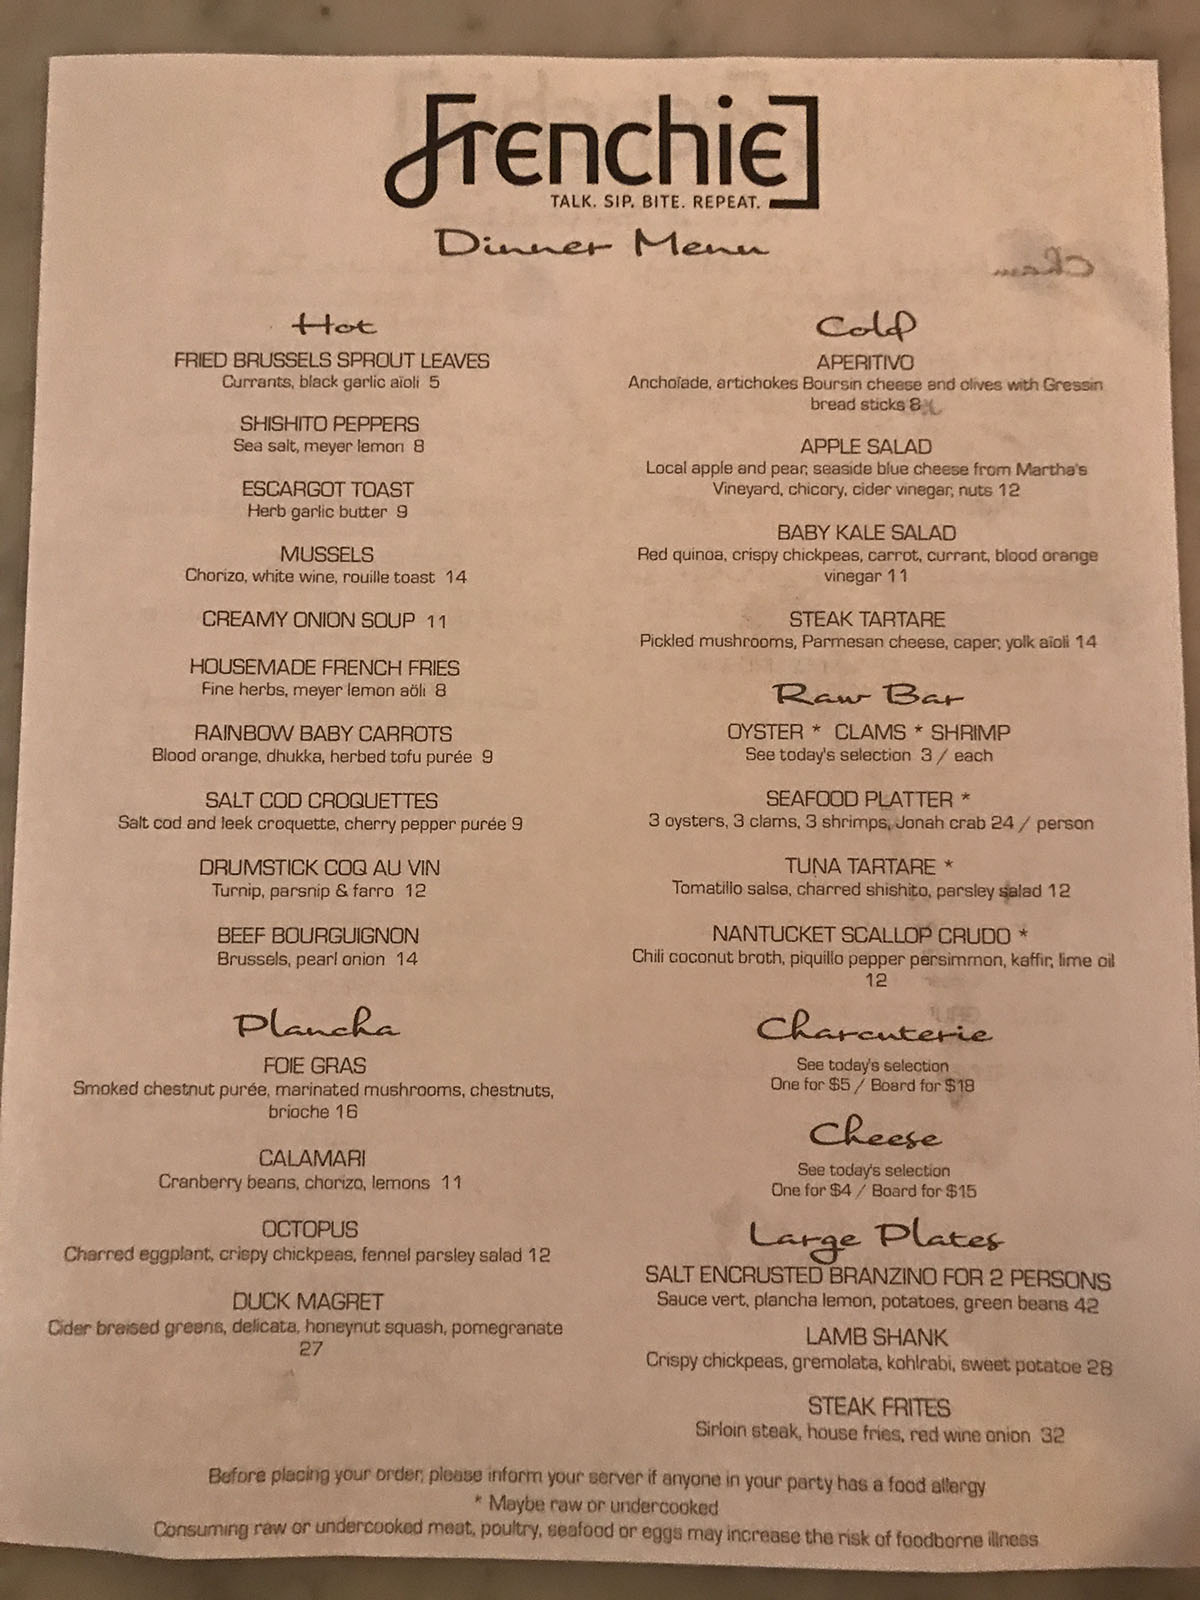 Frenchie dinner menu in Boston's south end